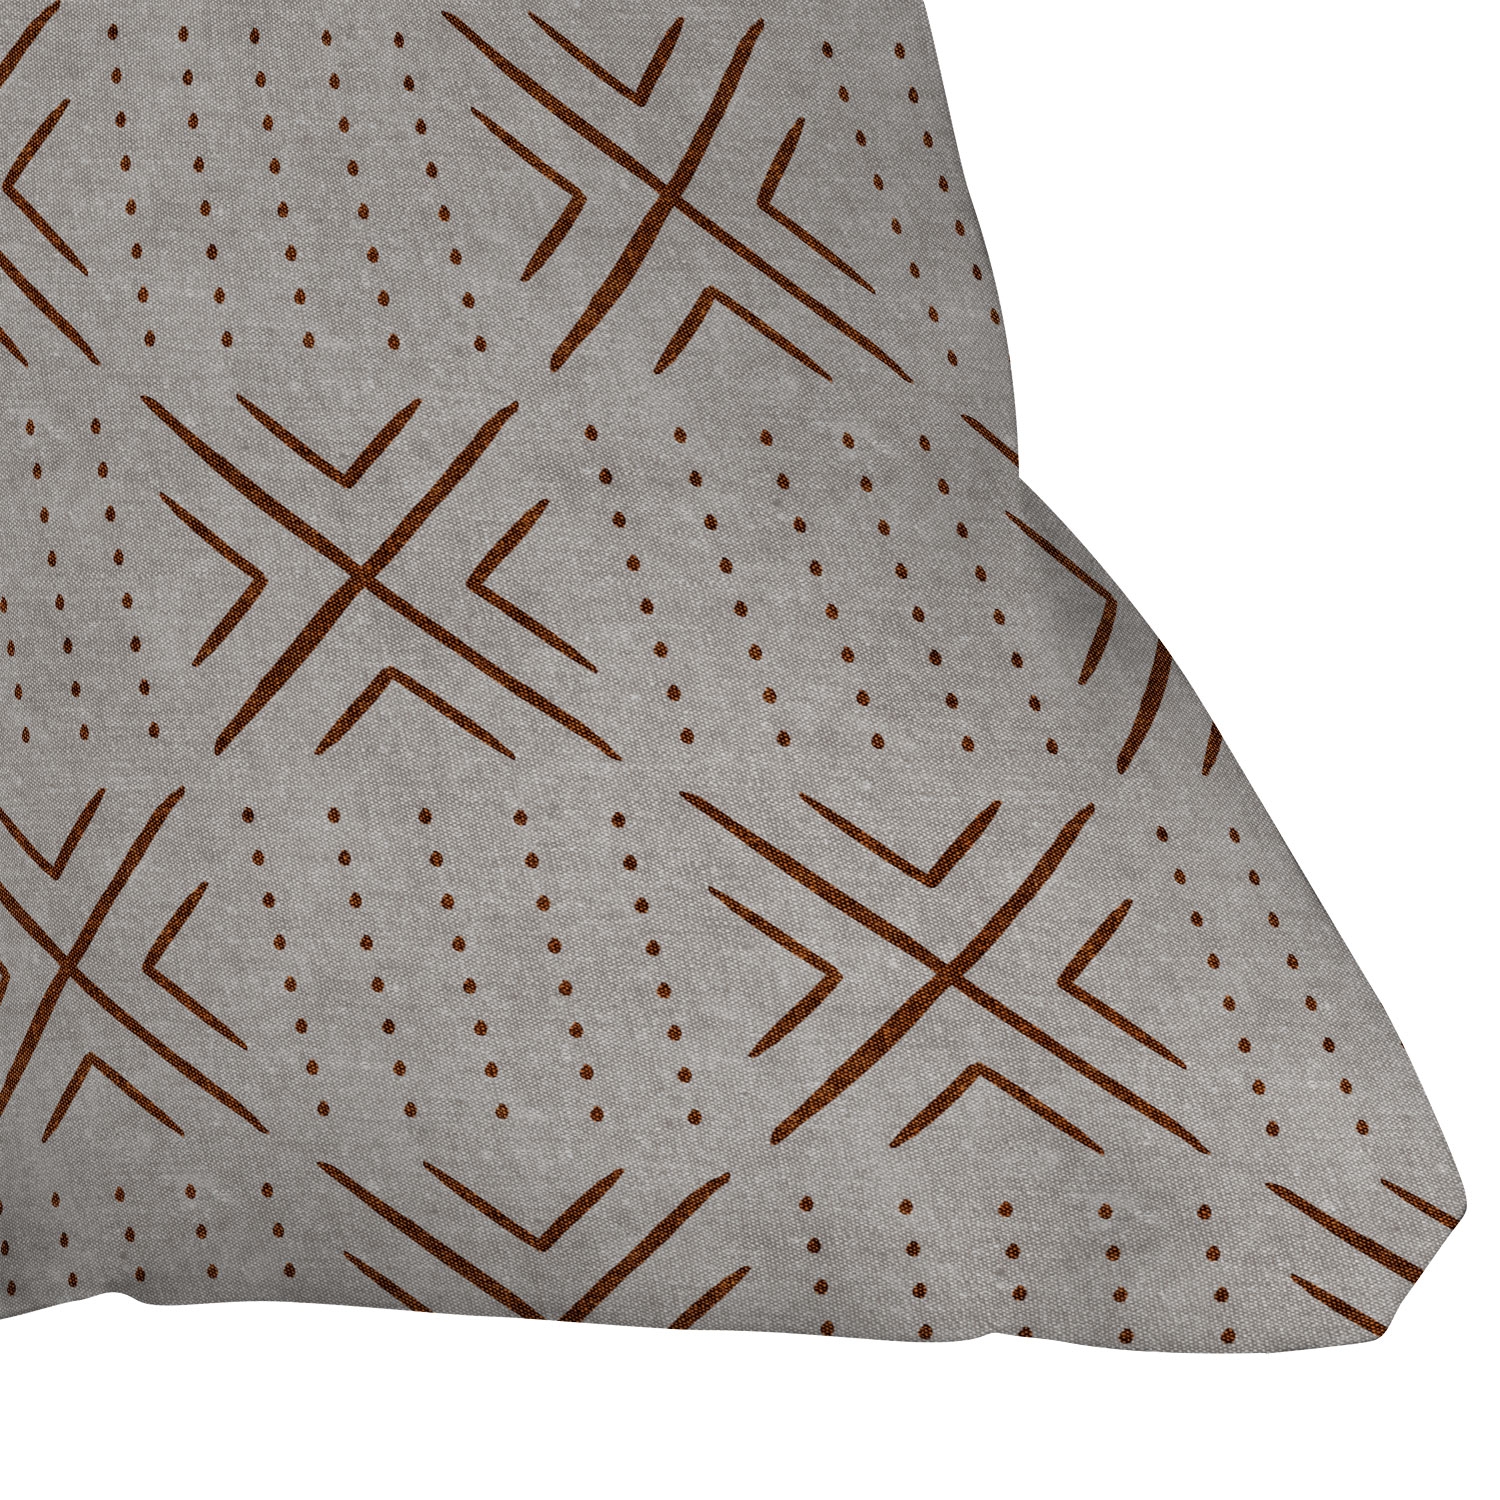 Mud Cloth Tile Stone Rust by Little Arrow Design Co - Outdoor Throw Pillow, 20" x 20" - Image 2